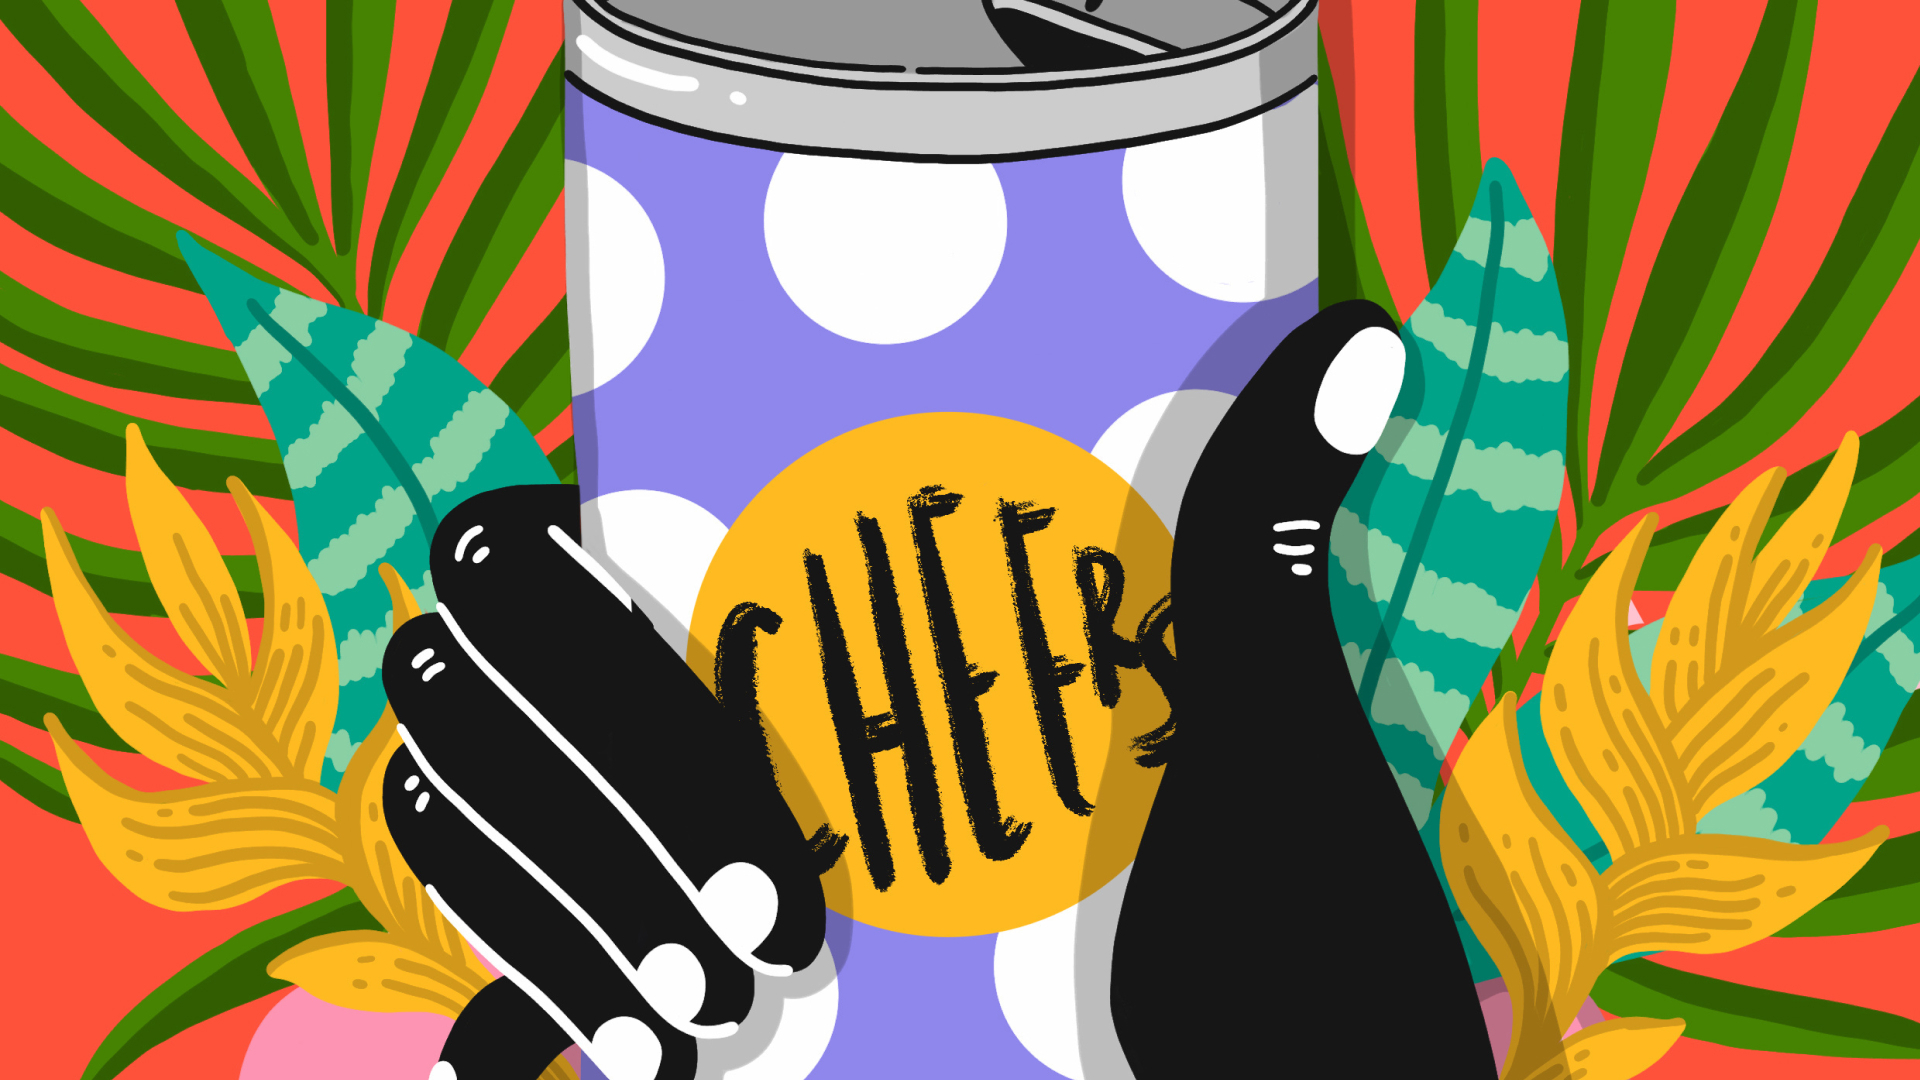 Colourful illustration of a hand holding a can that says ‘cheers’.